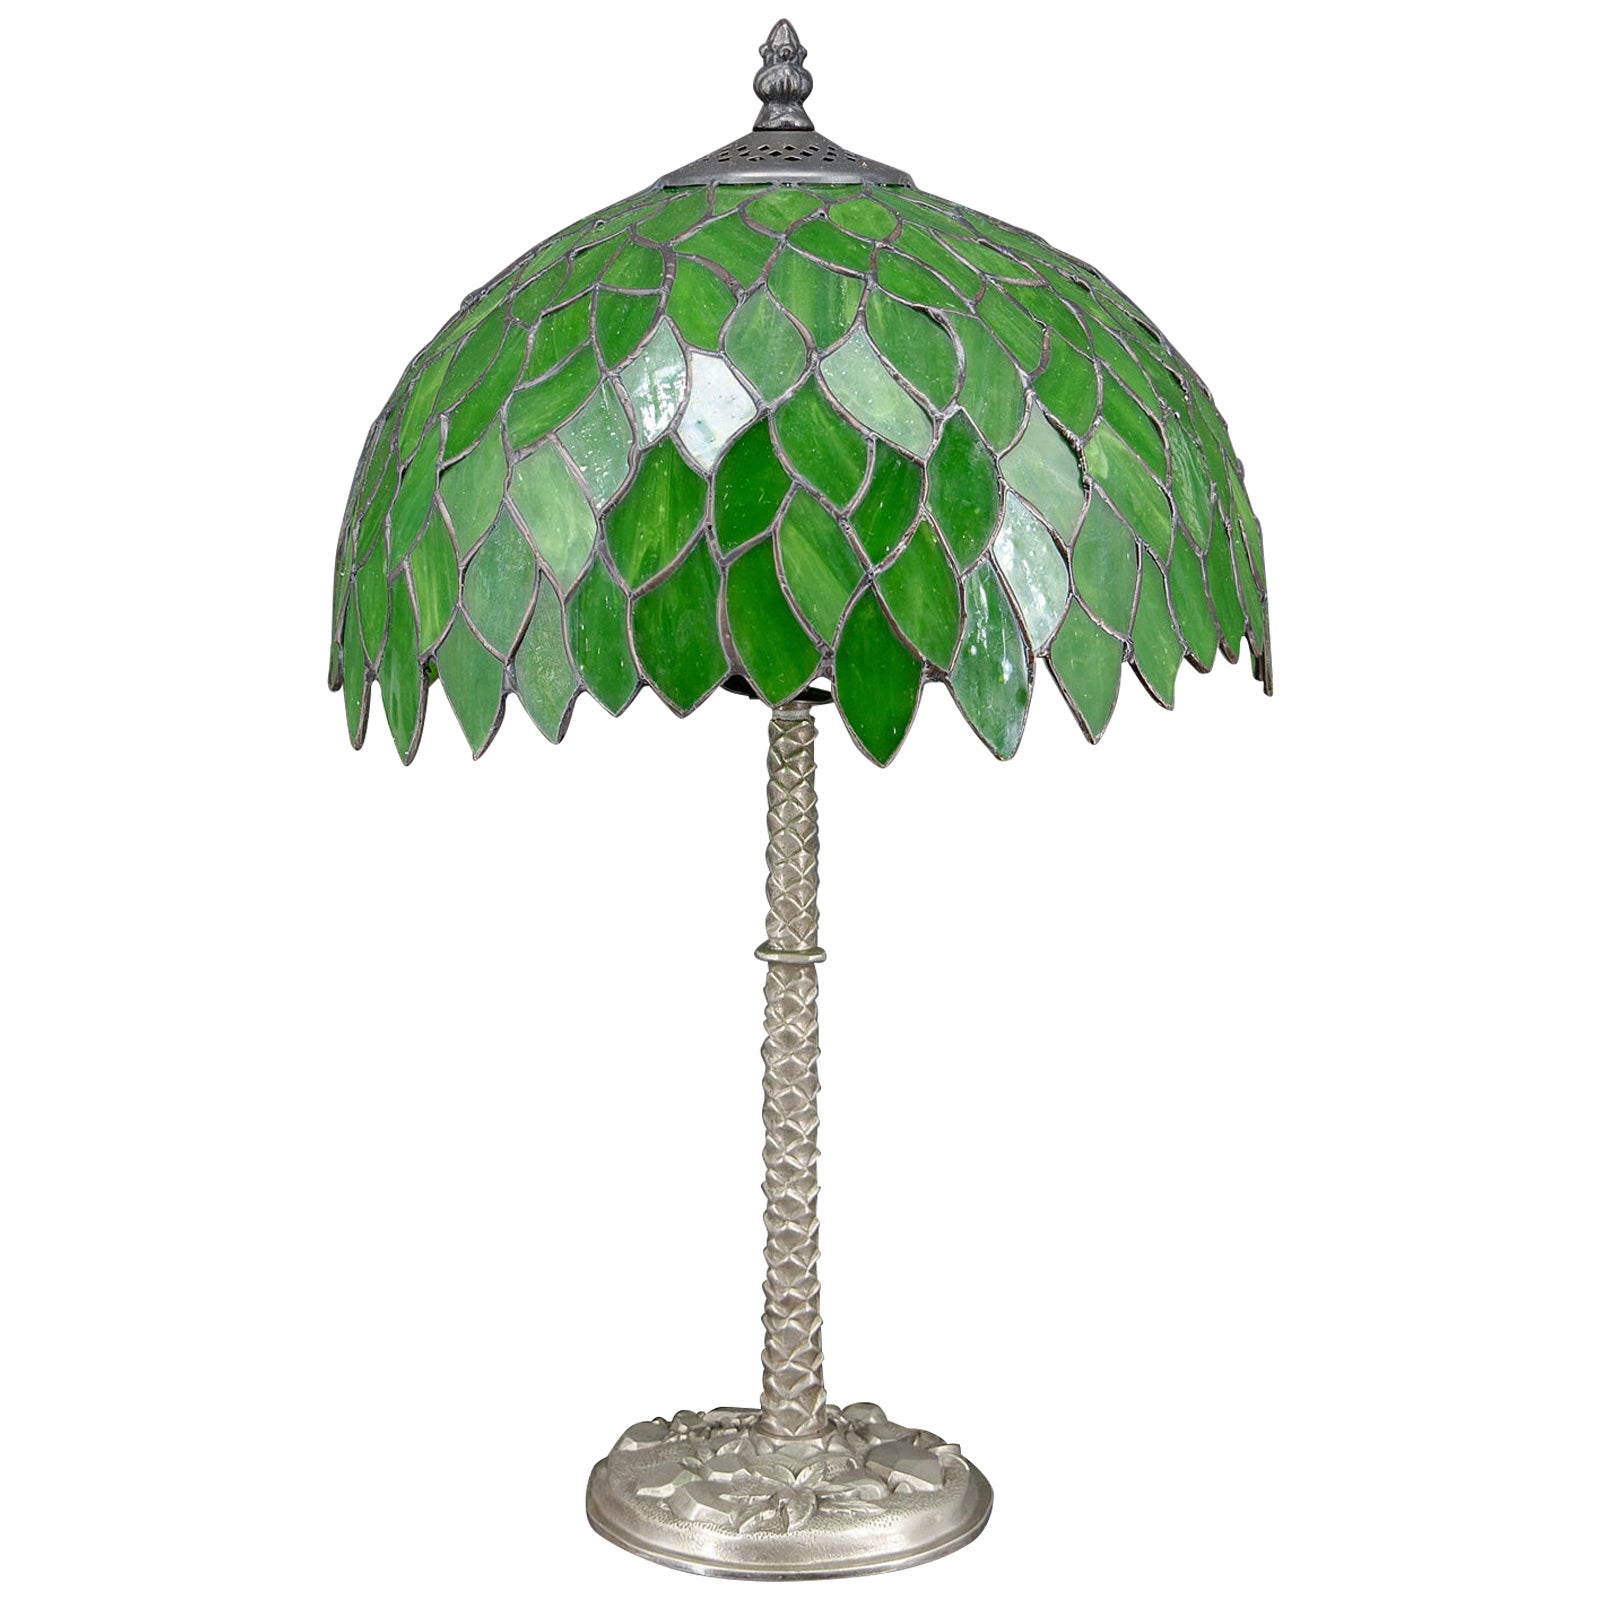 Palm lamp in silvered bronze and green stained glass lampshade, Art Nouveau 1900